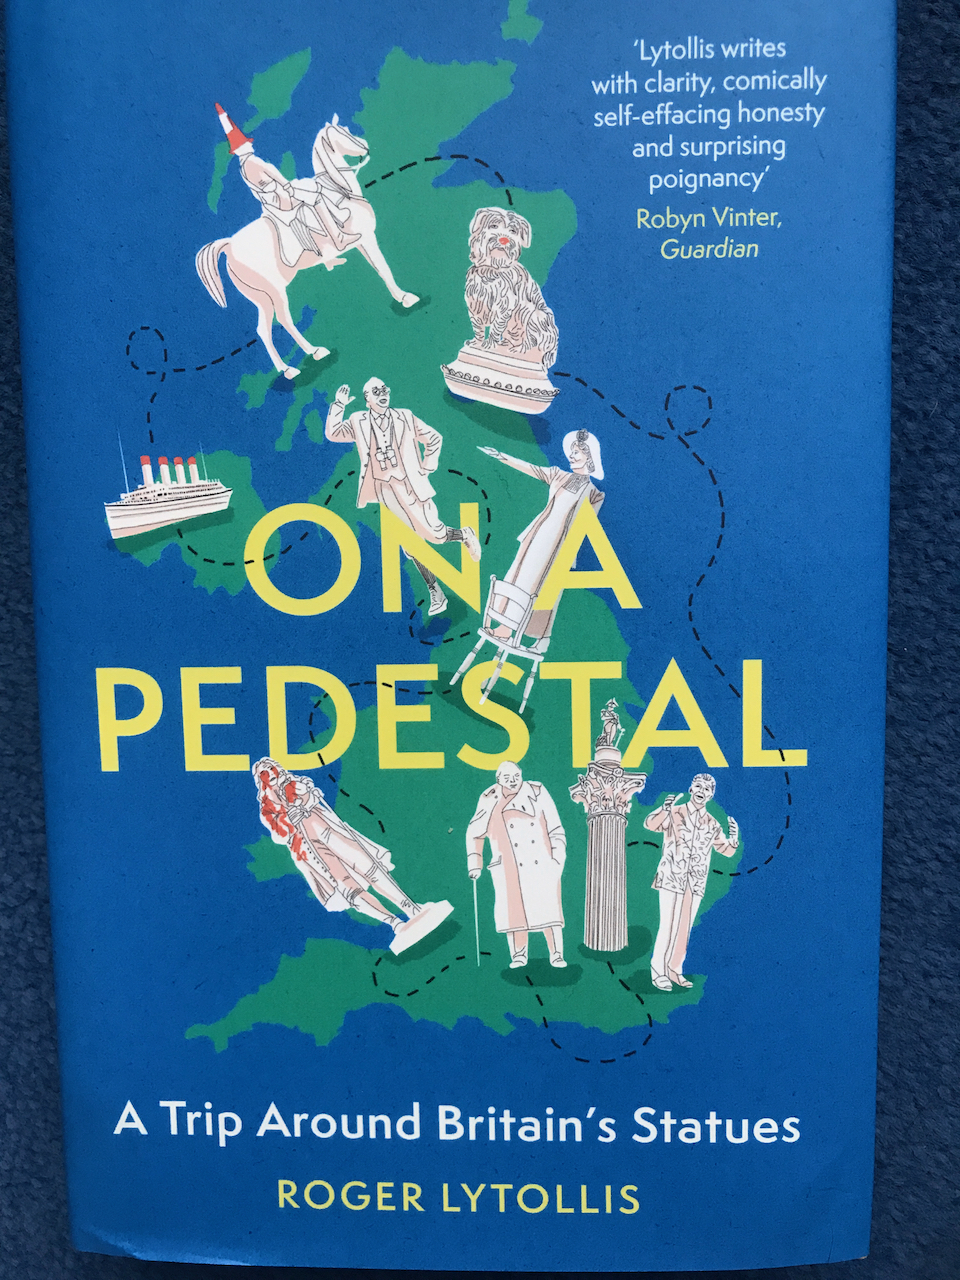 Cover of Of a Pedestal, which includes the OurEmmeline statue on a map of the UK